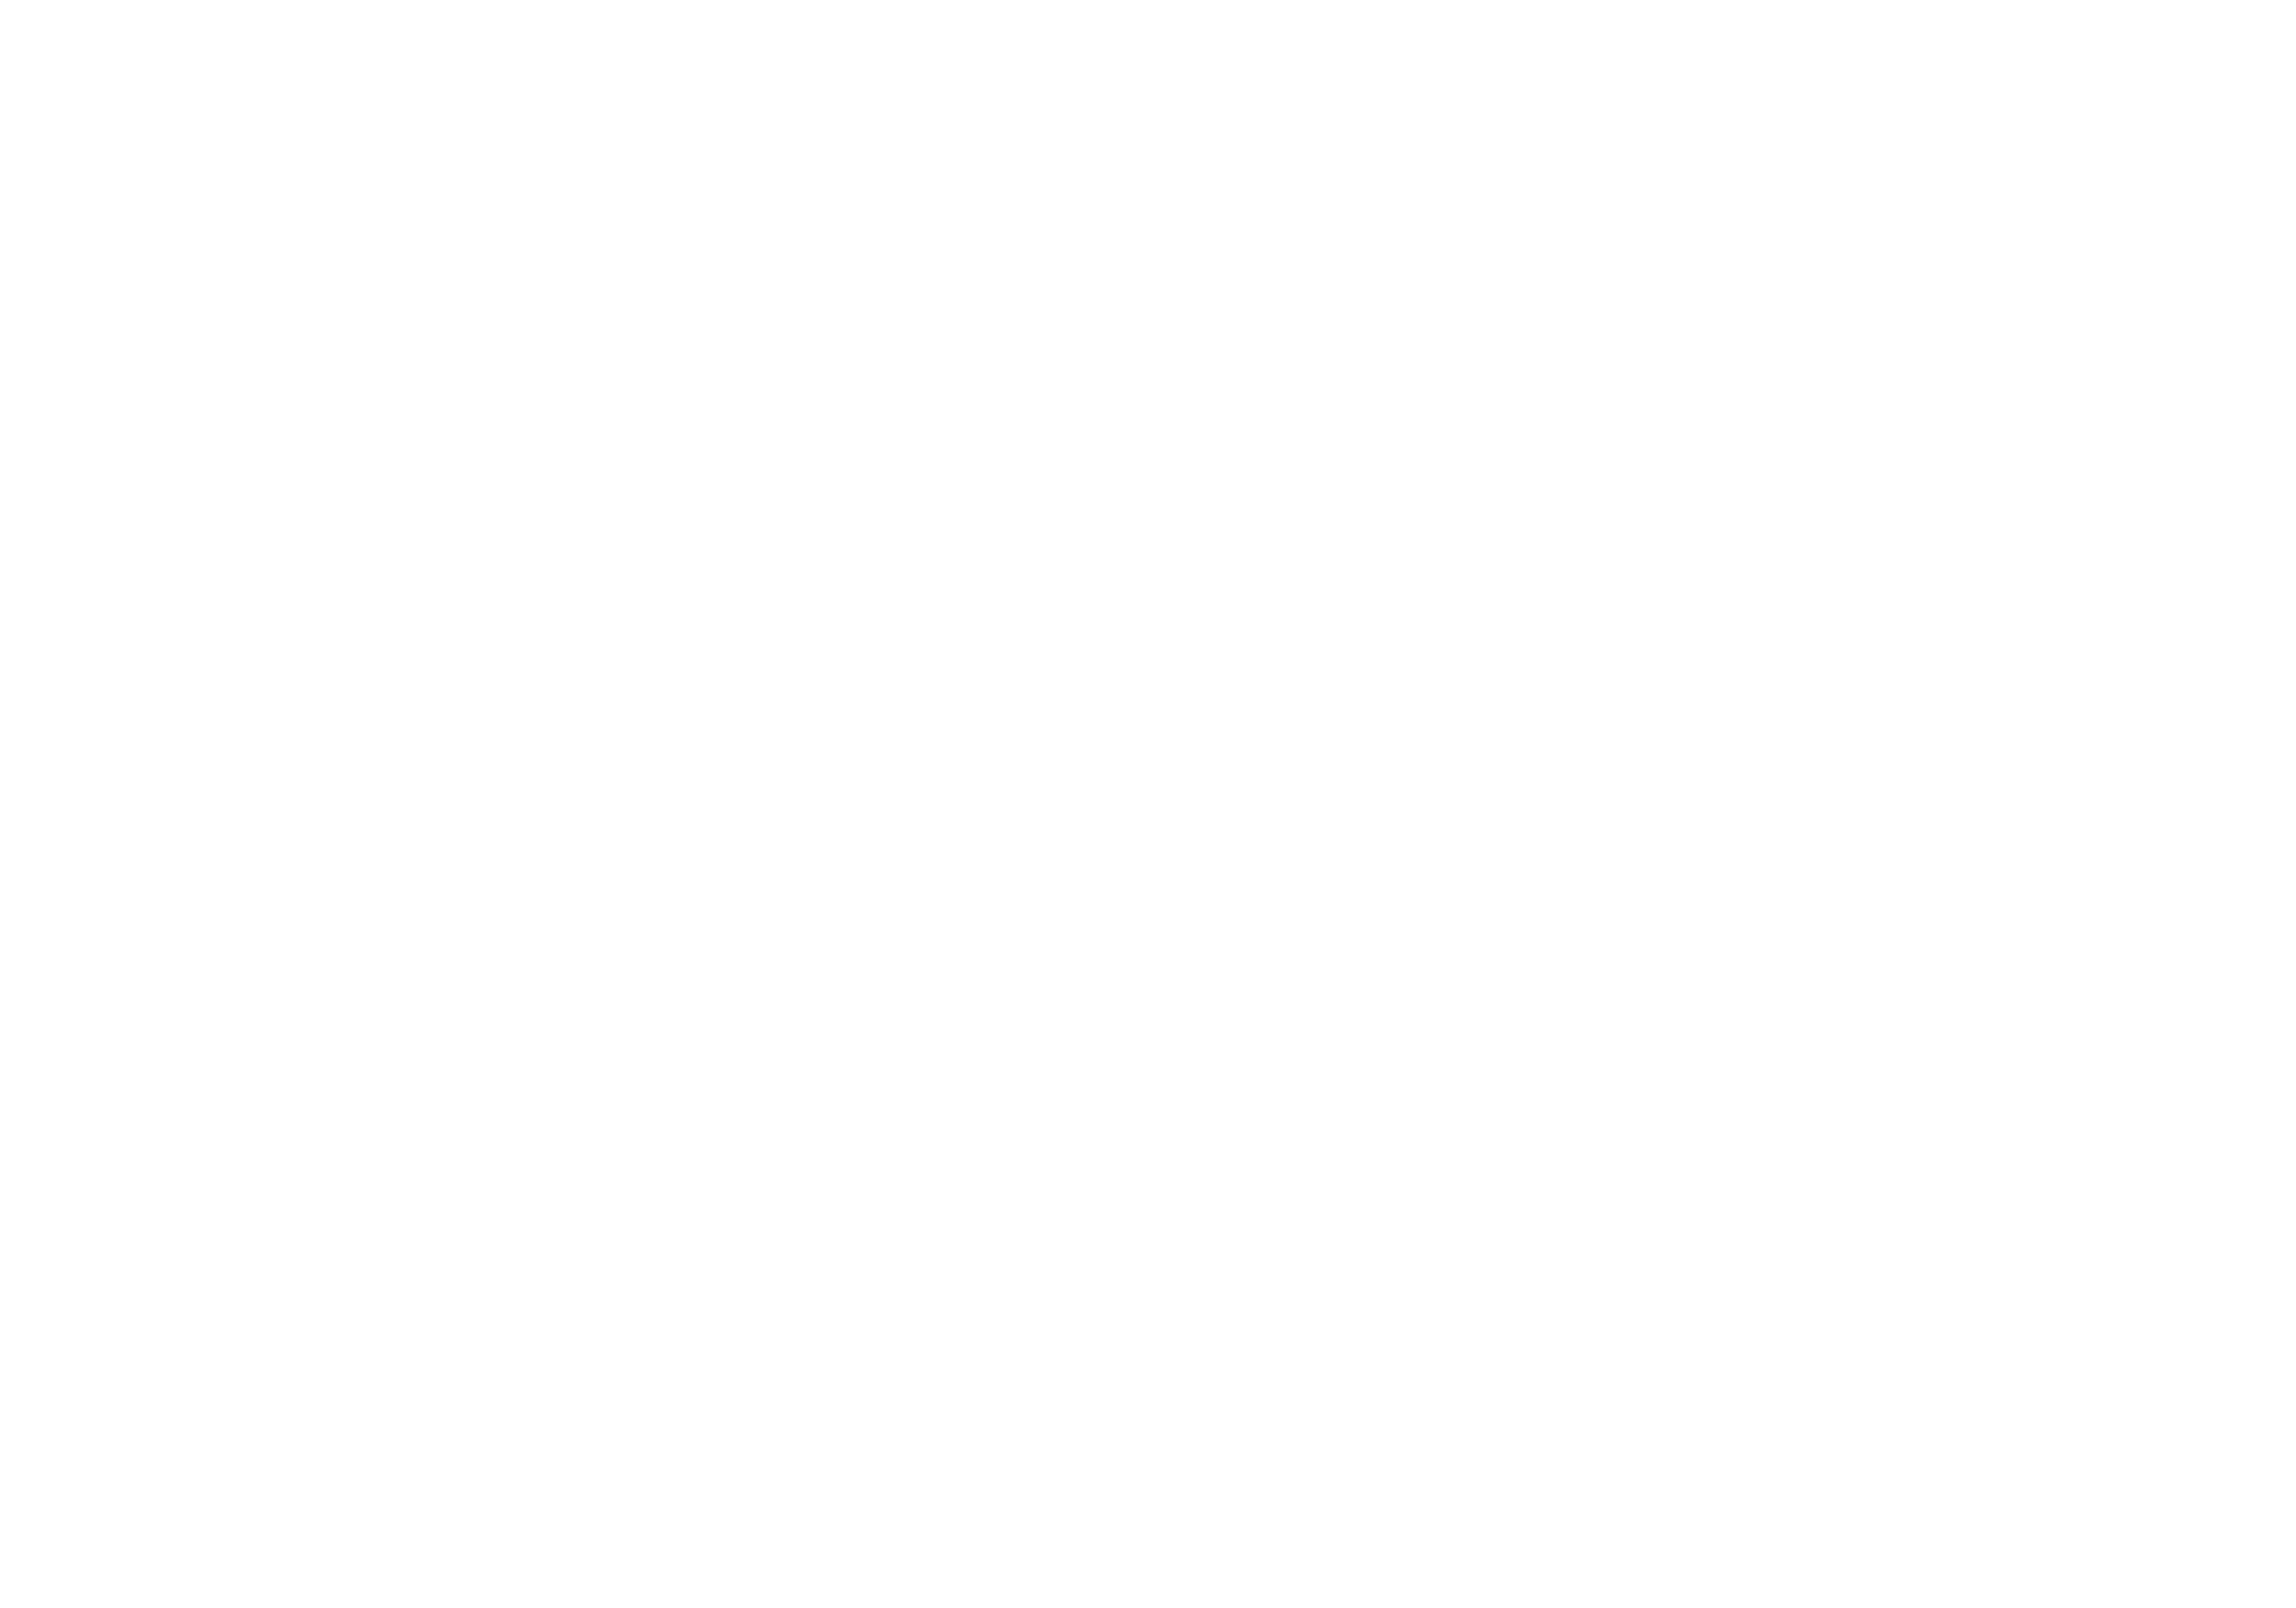 The pinkfong Company